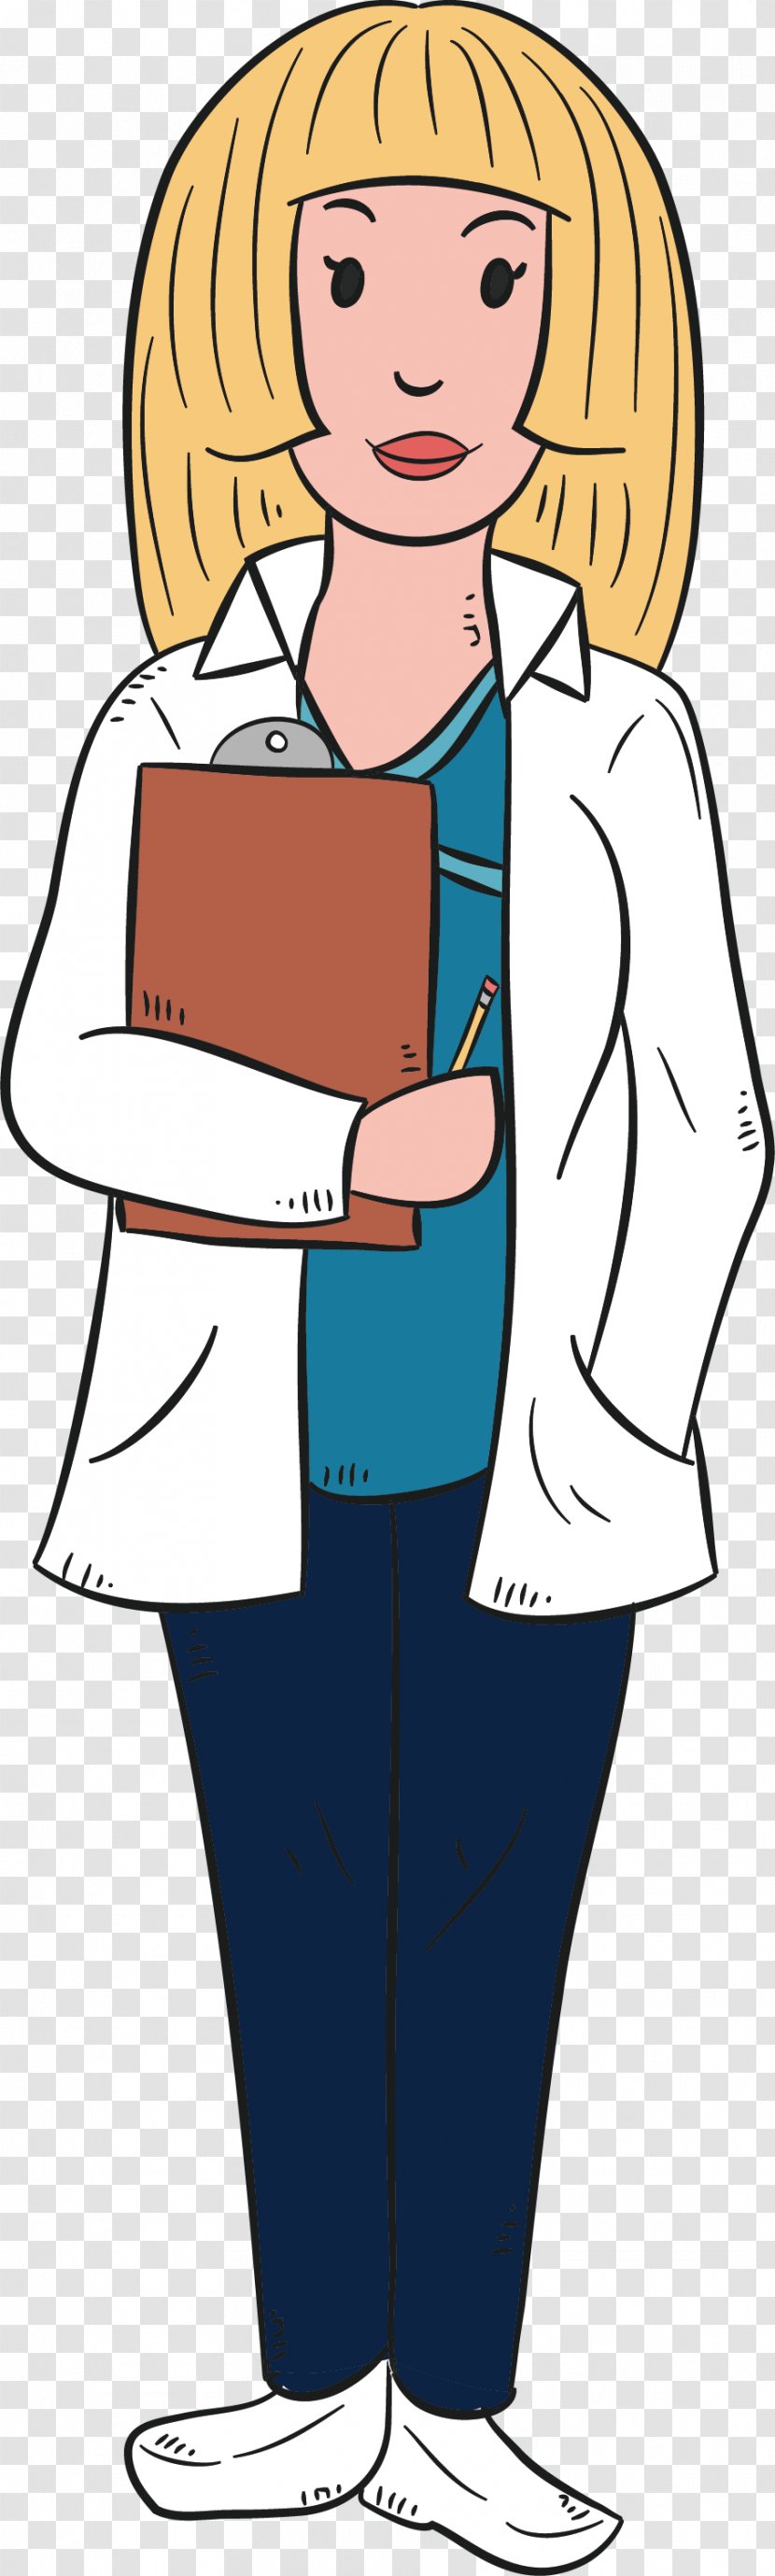 Blond Physician Clip Art - Tree - Blonde Hair Doctor Transparent PNG